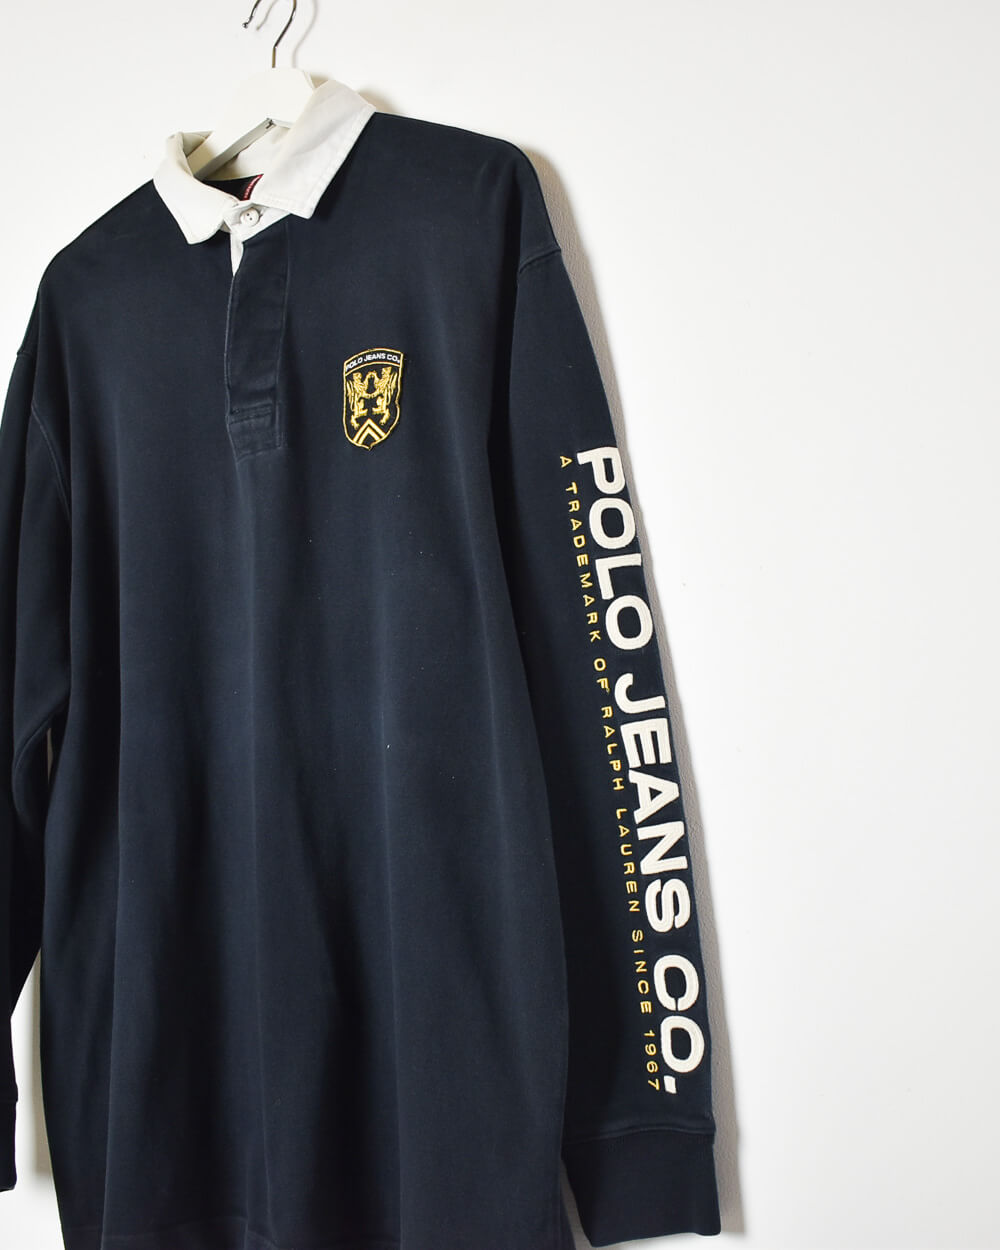 Black Ralph Lauren Polo Jeans Co Rugby Shirt - X-Large